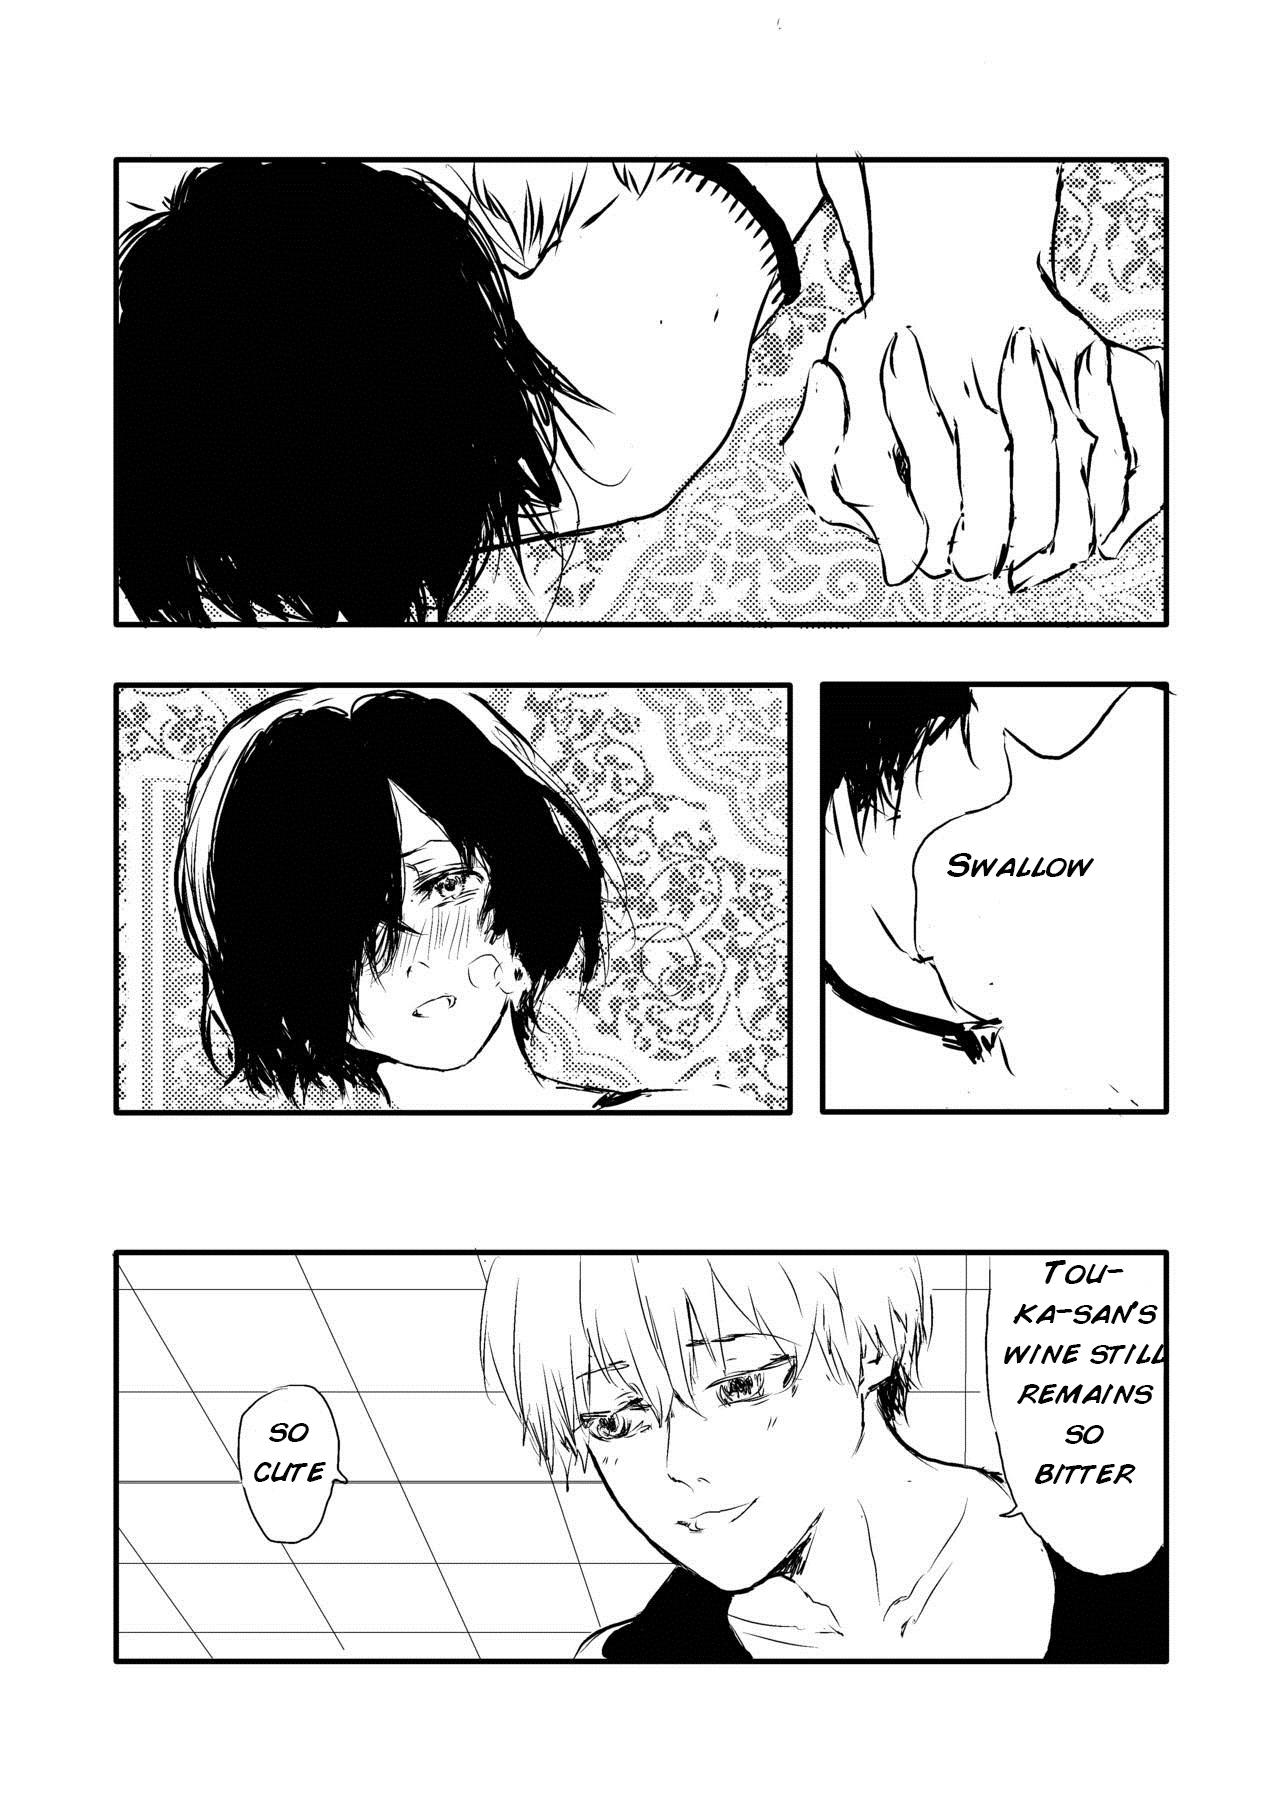 Casting Melt - Tokyo ghoul Fucking Girls - Page 4